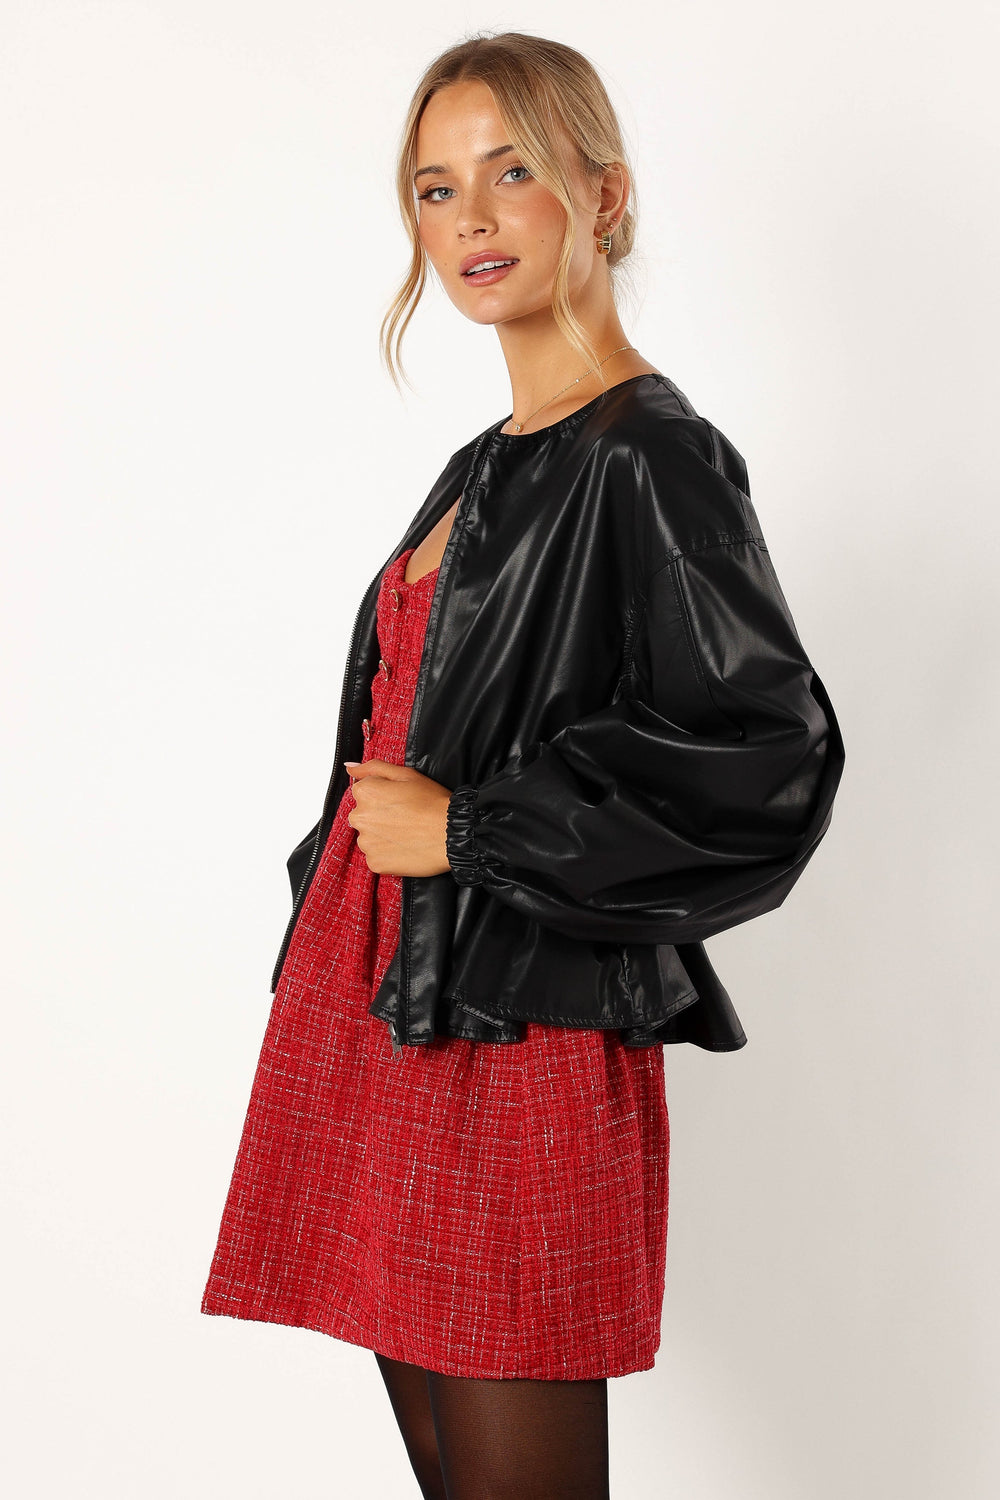 Petal and Pup USA OUTERWEAR Ivanna Faux Leather Puff Sleeve Jacket - Black